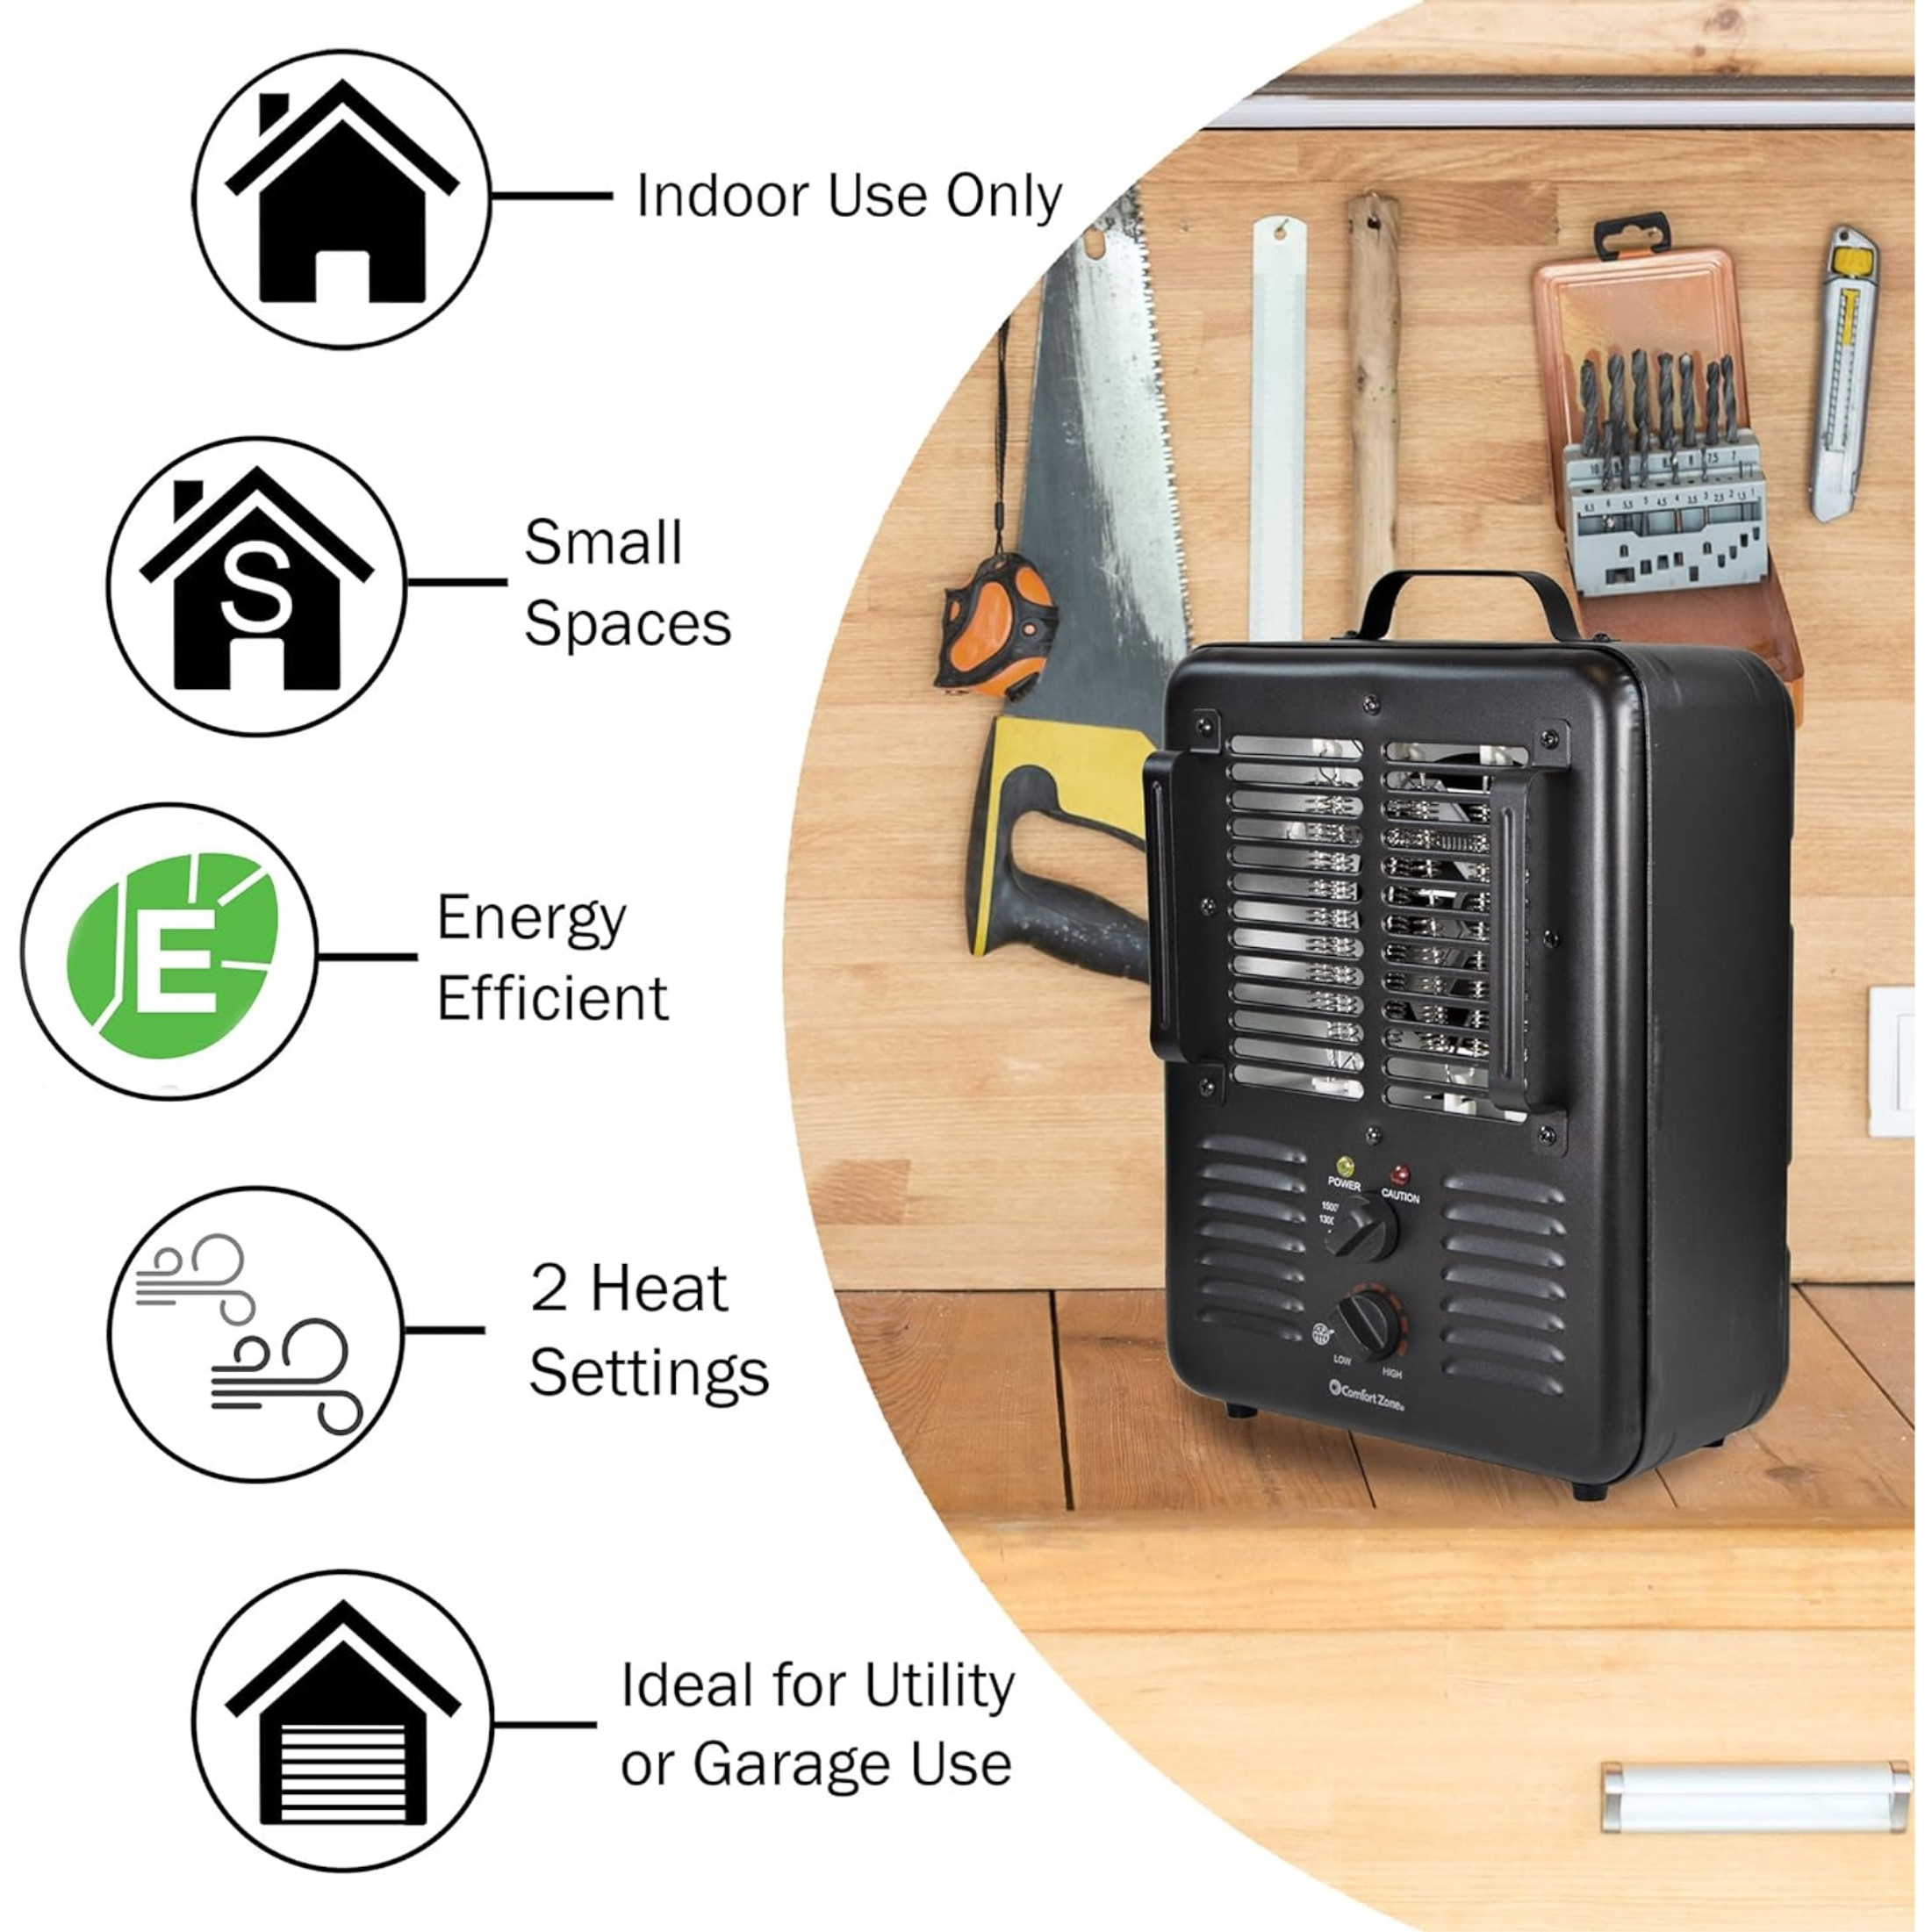 Comfort Zone Electric Portable Milkhouse Style Utility Space Heater with Adjustable Thermostat, 3-Prong Plug, Overheat Protection, Black, 14.5"